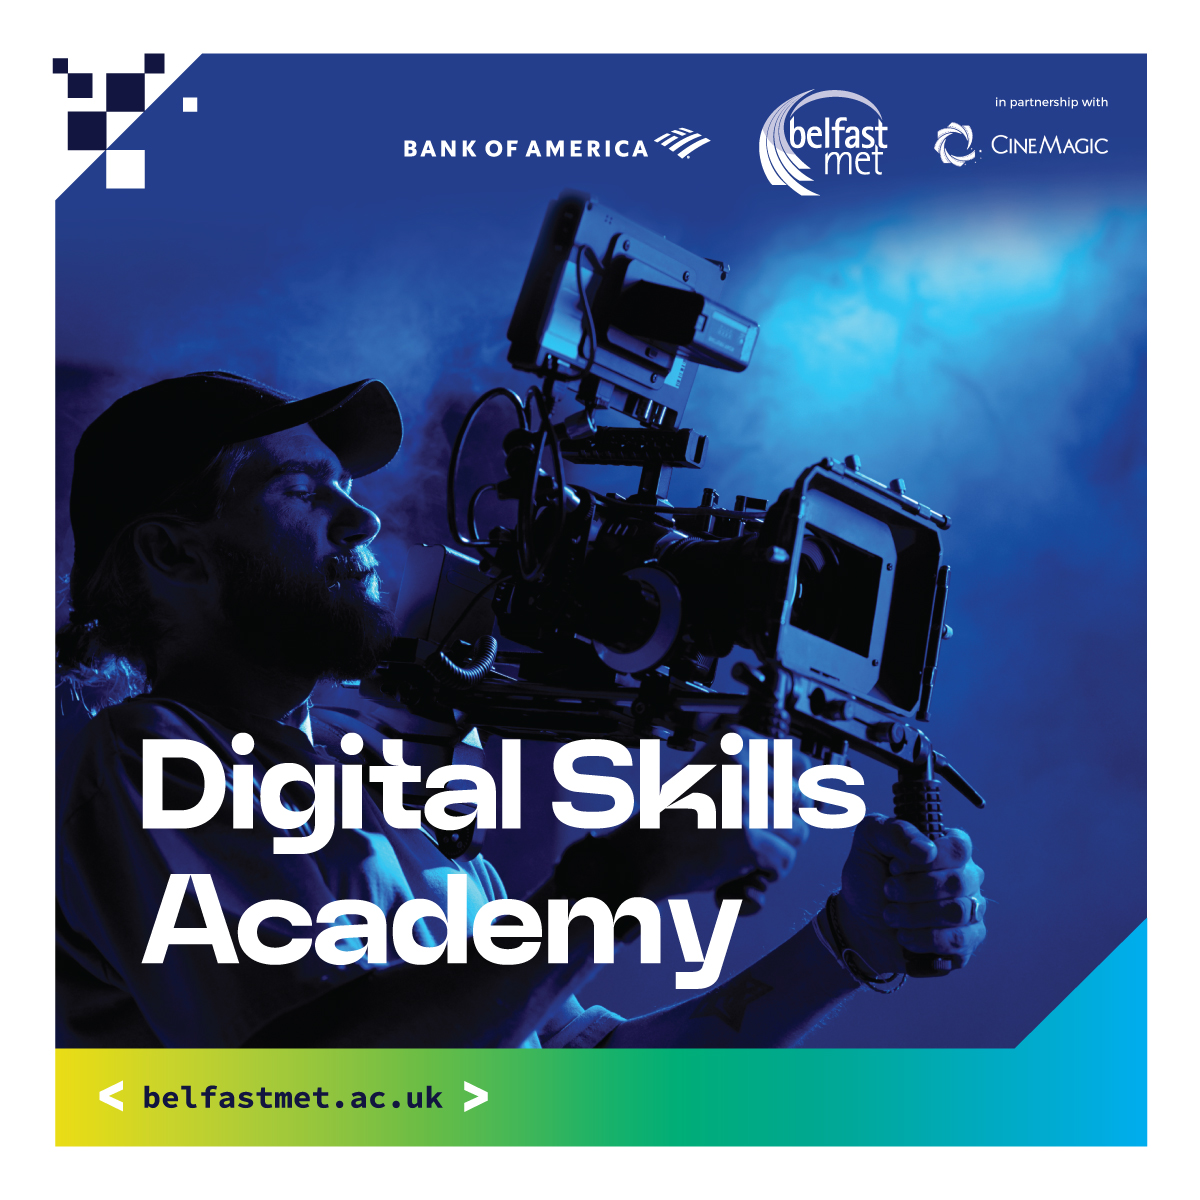 Unlock your creative potential! Apply by 08/05/2024 for the Digital Skills Academy with @bfastmet. Learn to:

💡 Generate story ideas
🍿 Produce a short film
💪 Develop your strengths

🔗 tinyurl.com/2svwpsj4

#Cinemagic #CreativeCareers #BeInspired @BankofAmerica